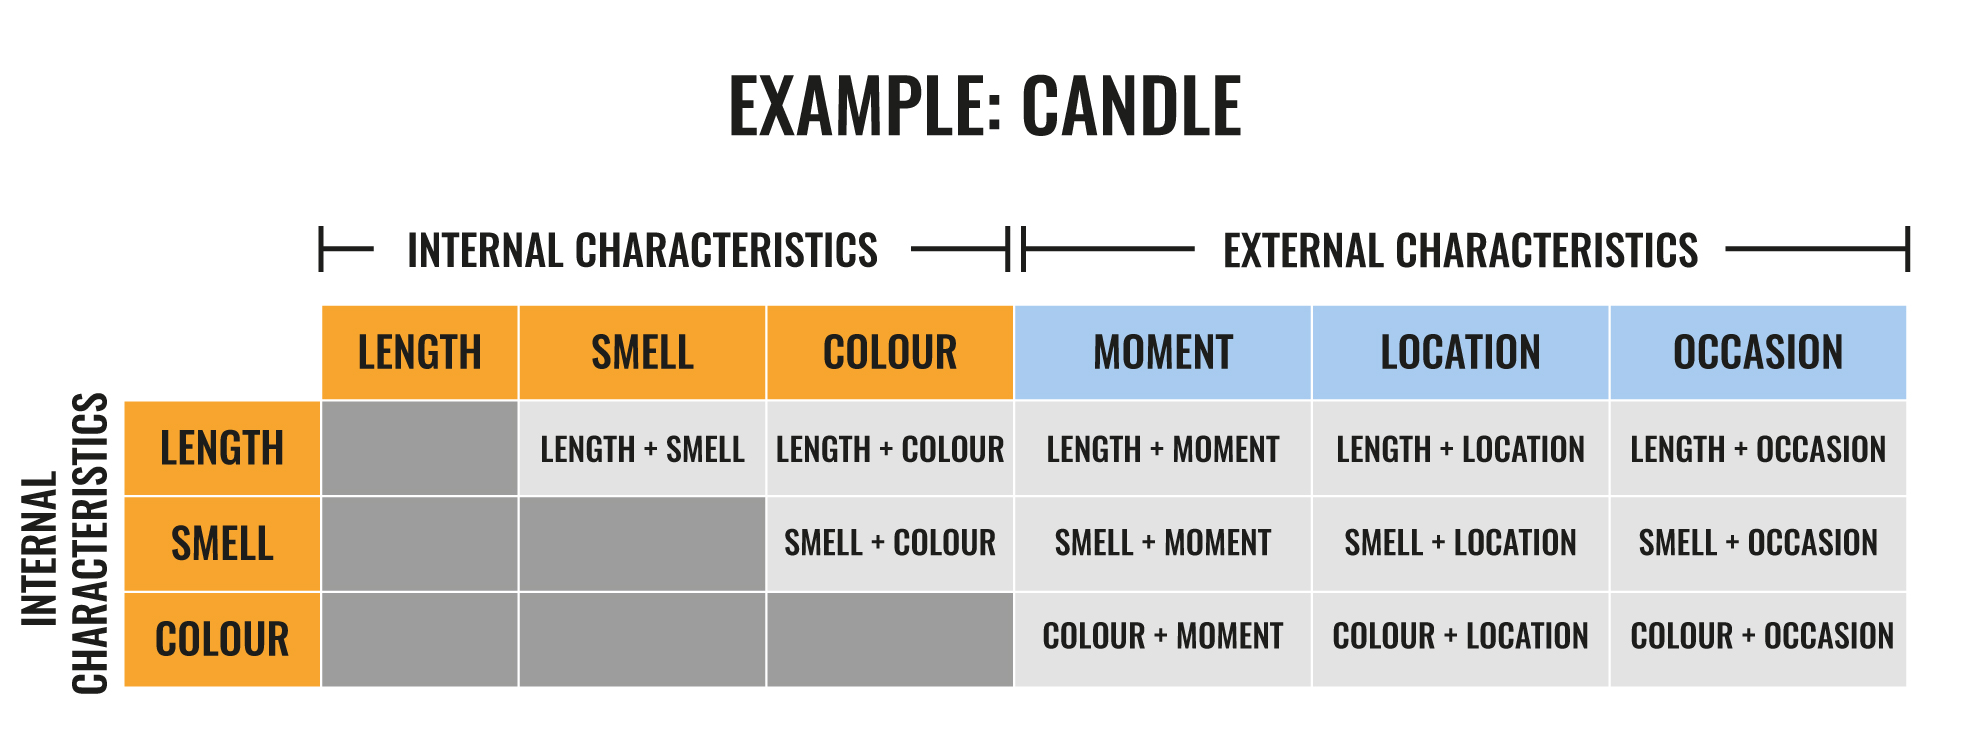 Candle innovation